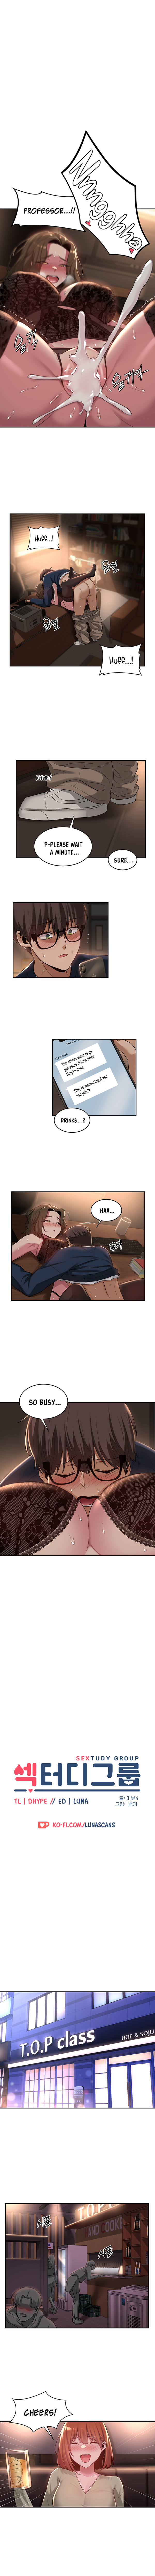 Panel Image 1 for chapter 19 of manhwa Sex Study Group on read.oppai.stream